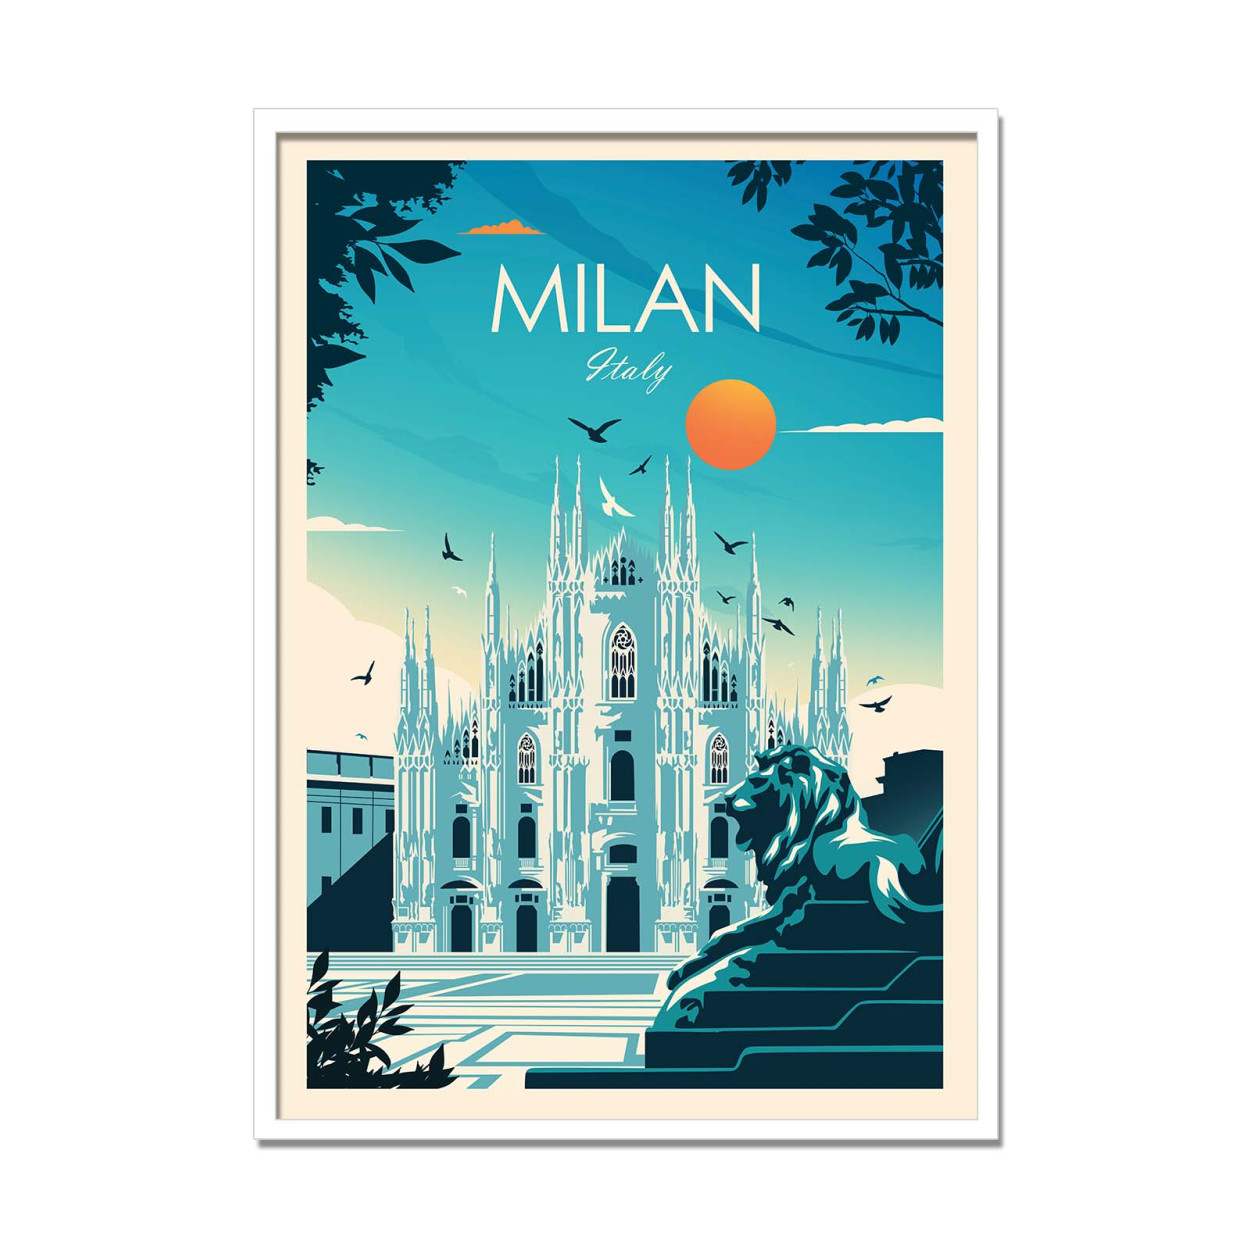 Art-Poster Travel Posters - Milan Italy - Studio Inception